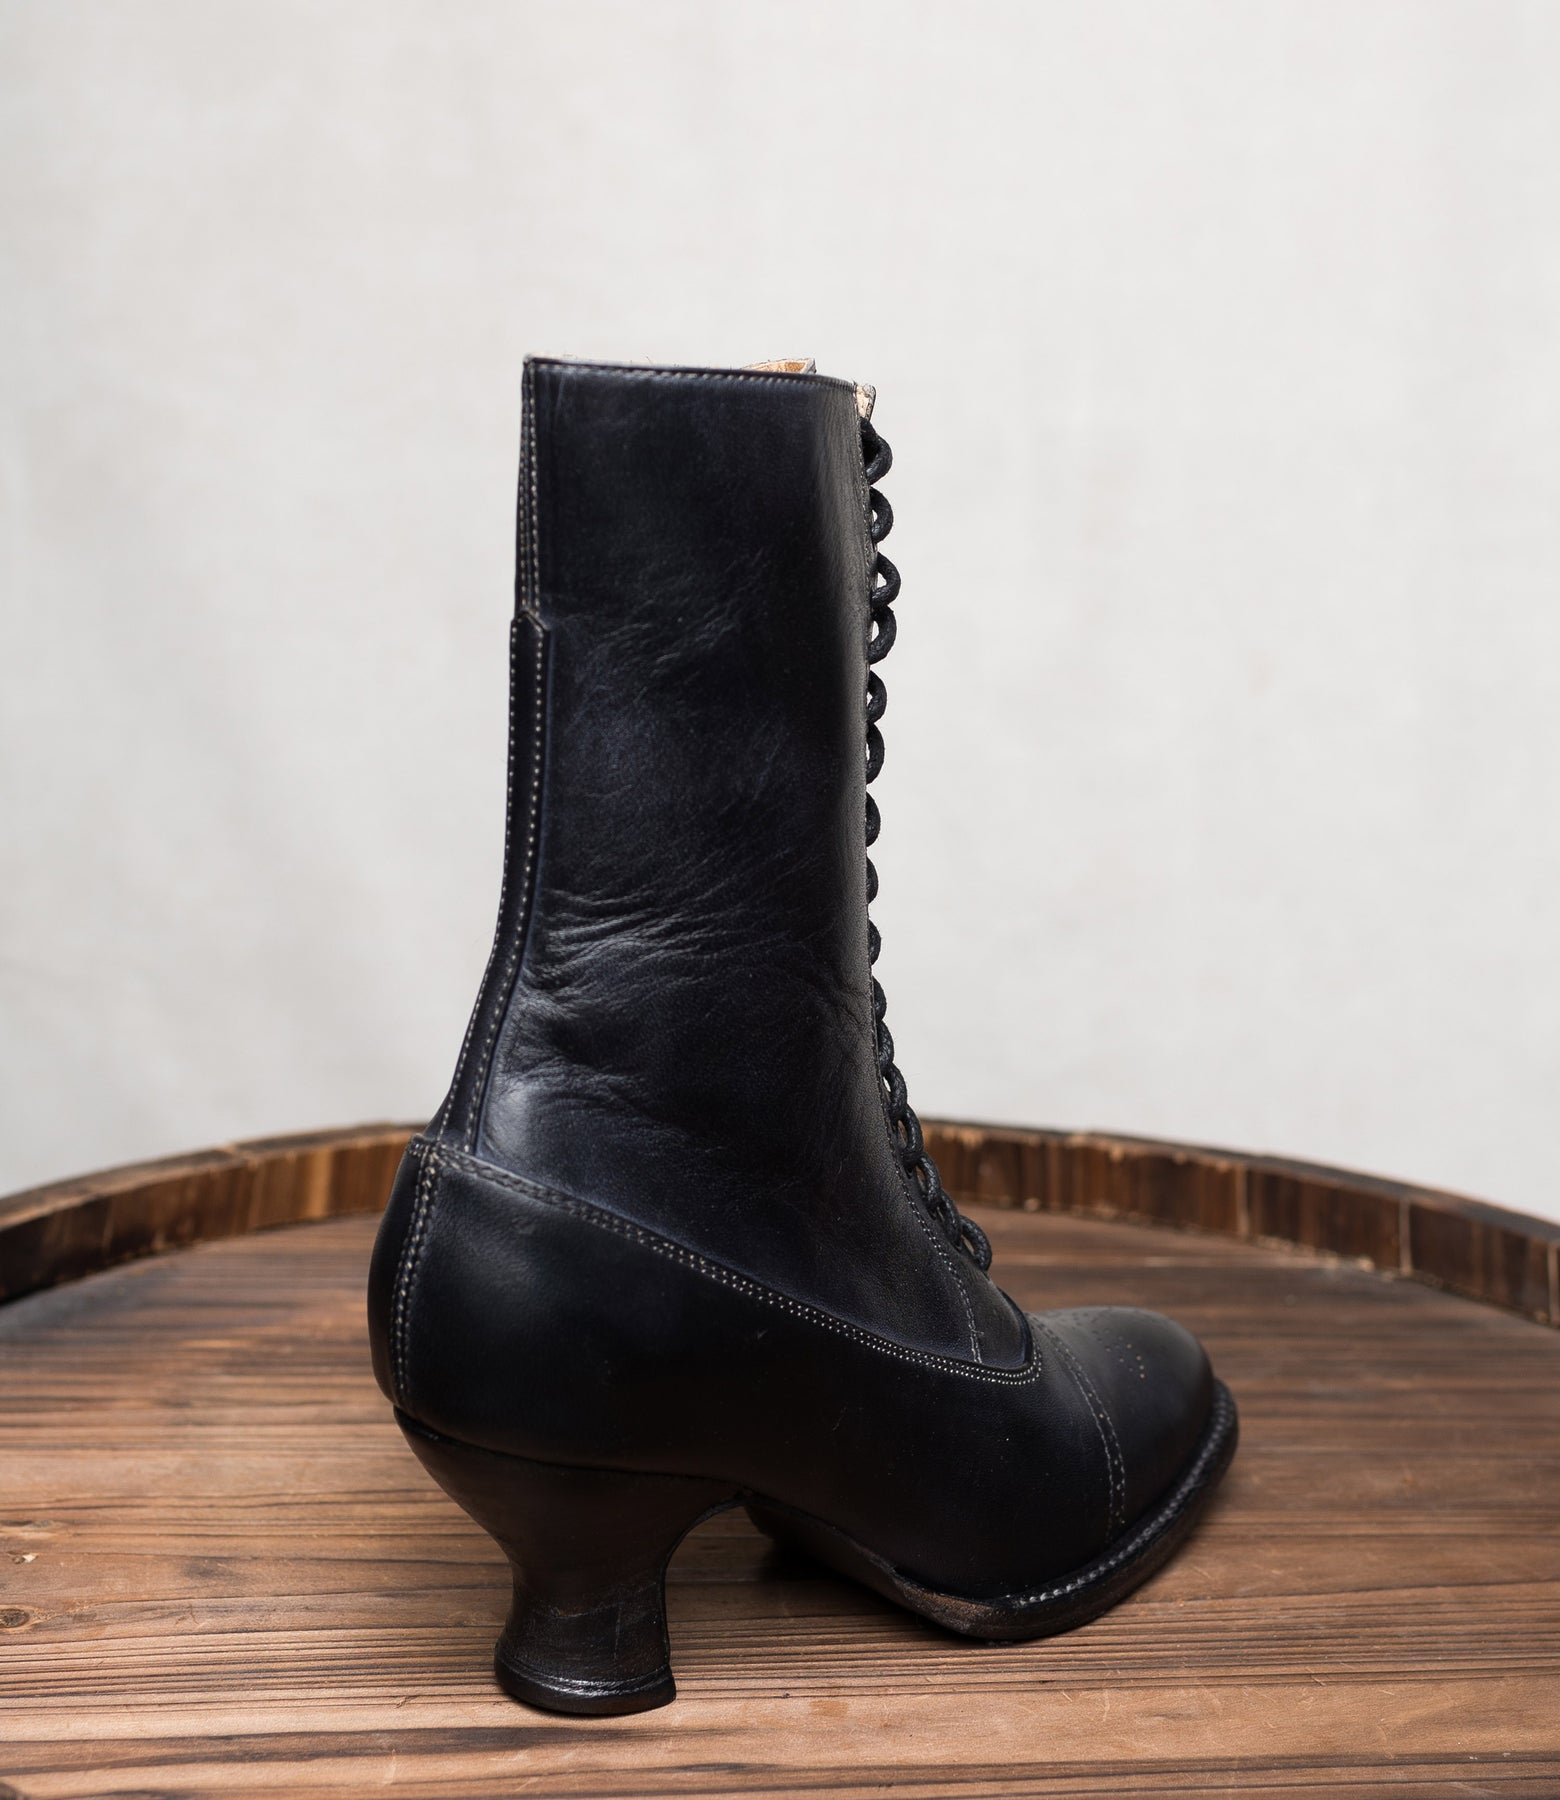 Mirabelle Victorian Mid-Calf Leather Boots in Black Rustic – WardrobeShop